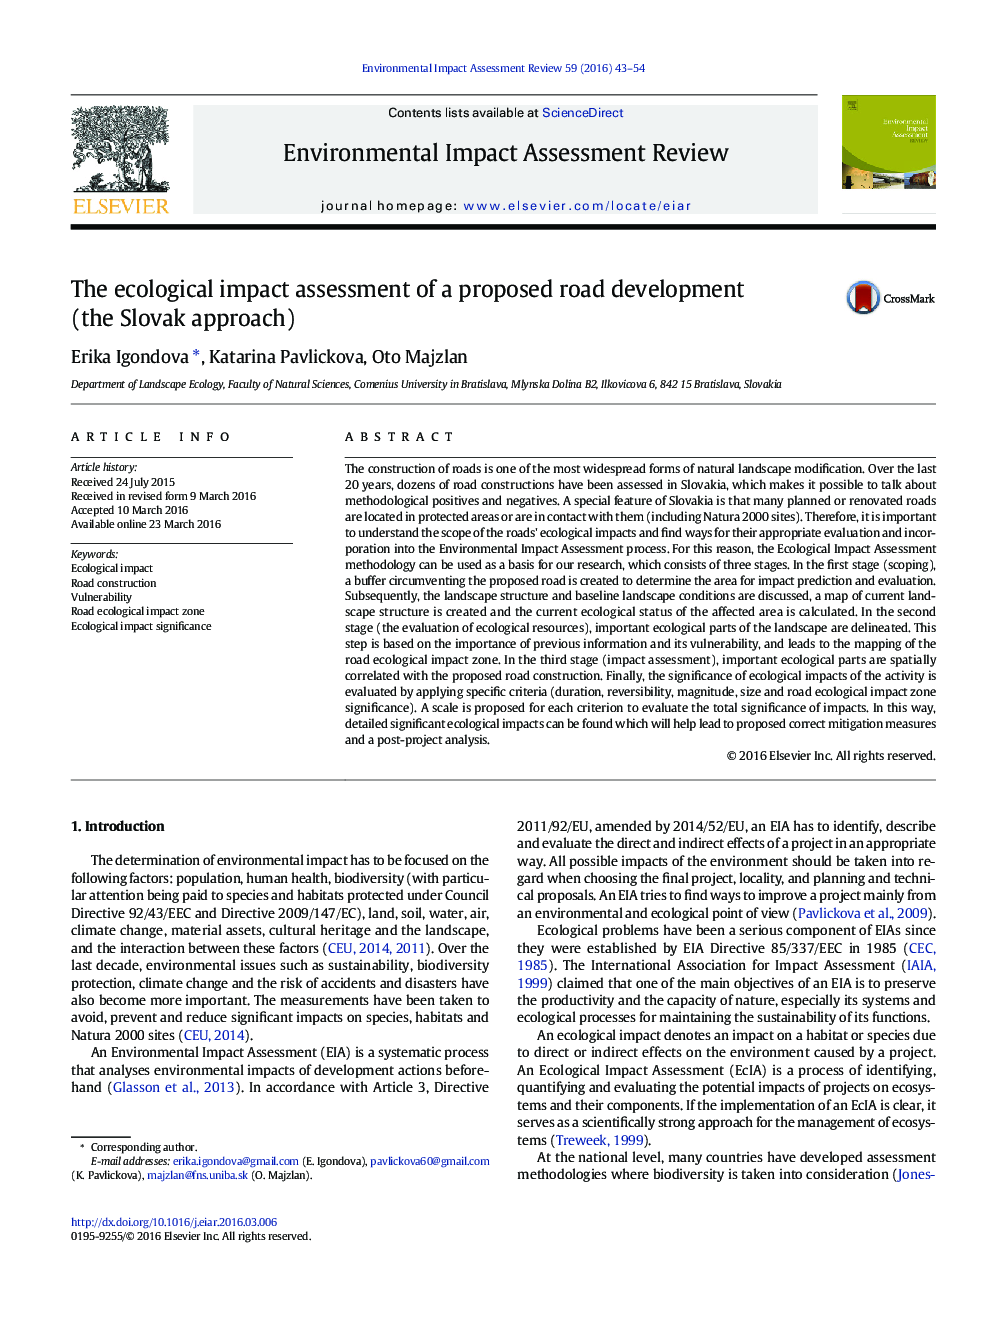 The ecological impact assessment of a proposed road development (the Slovak approach)